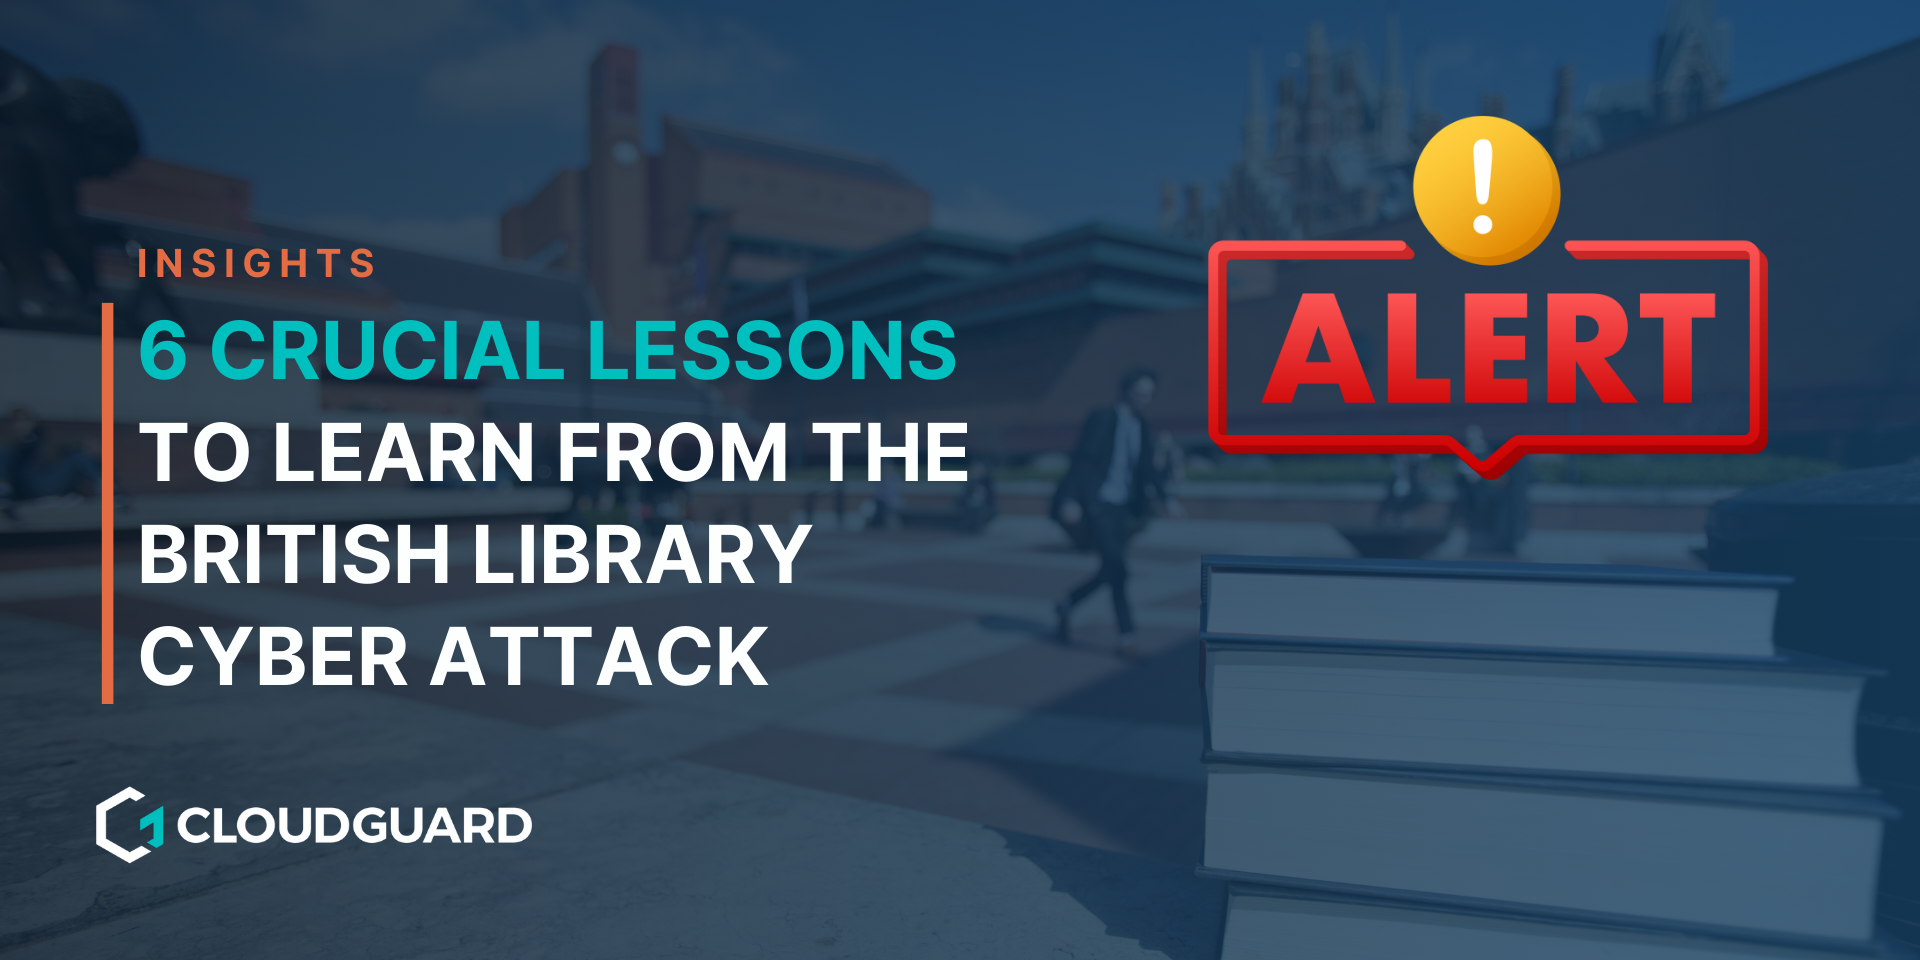 image of british library with text "6 crucial lessons to learn from the british library cyber attack"